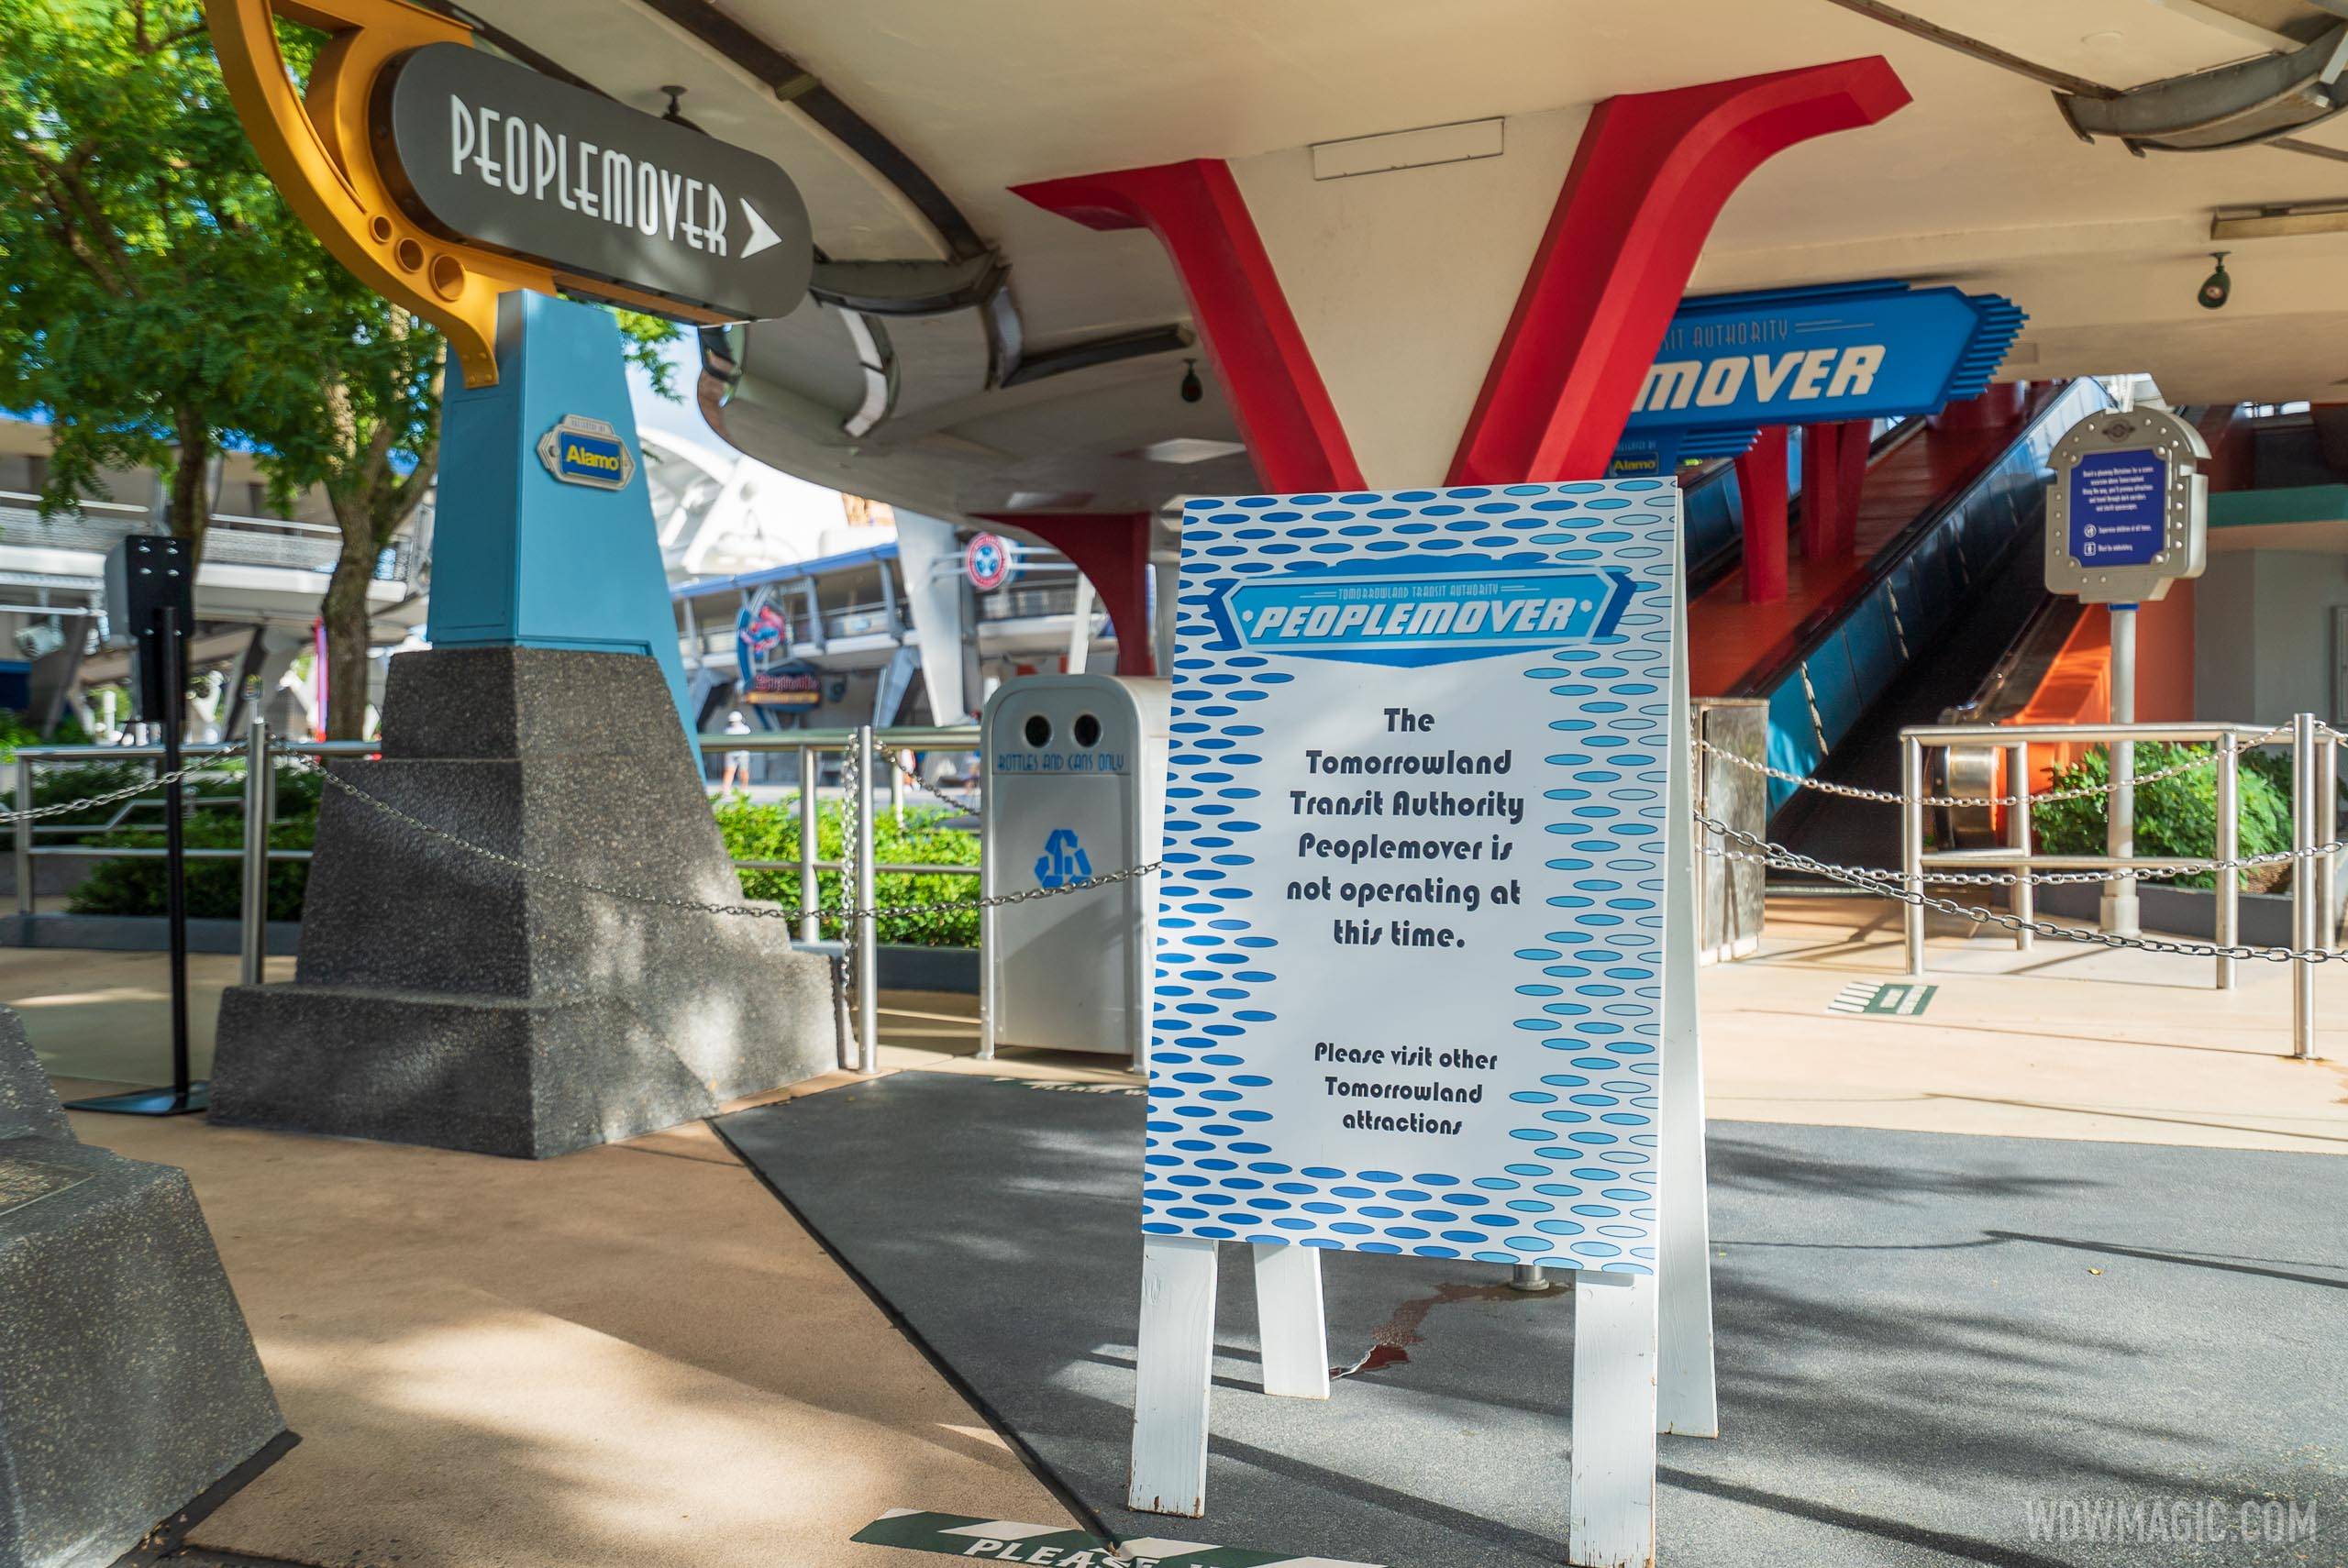 Magic Kingdom's PeopleMover remains on target for reopening this weekend